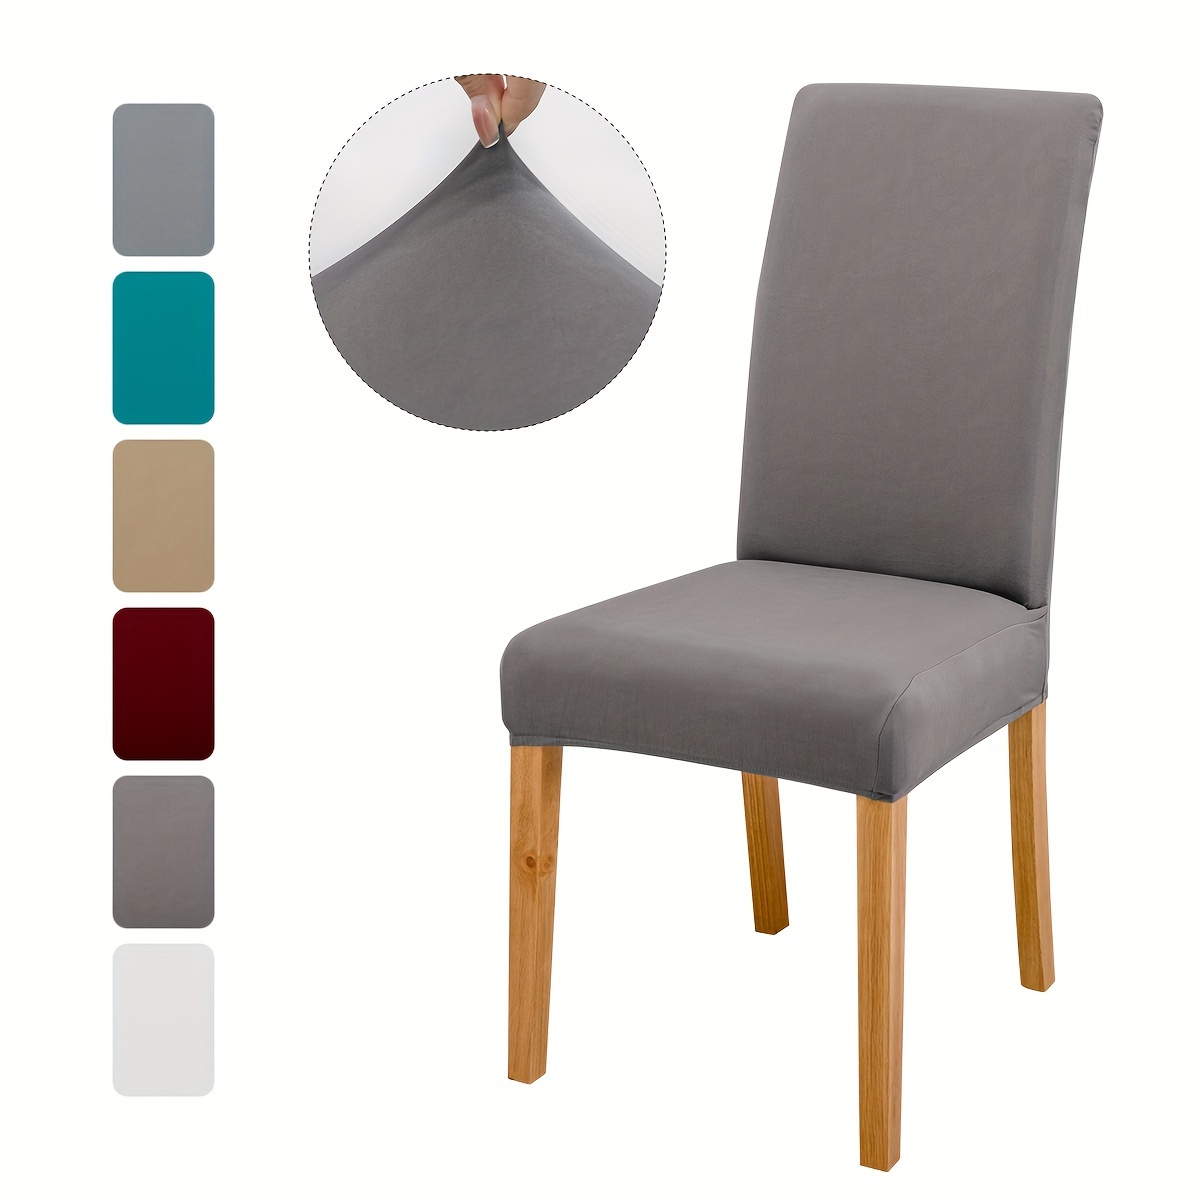 

4pc/6pc Fabric Solid Color Elastic Dining Chair Slipcovers, Stretch Chair Cover For Wedding Dining Room Office Banquet House Home Decor